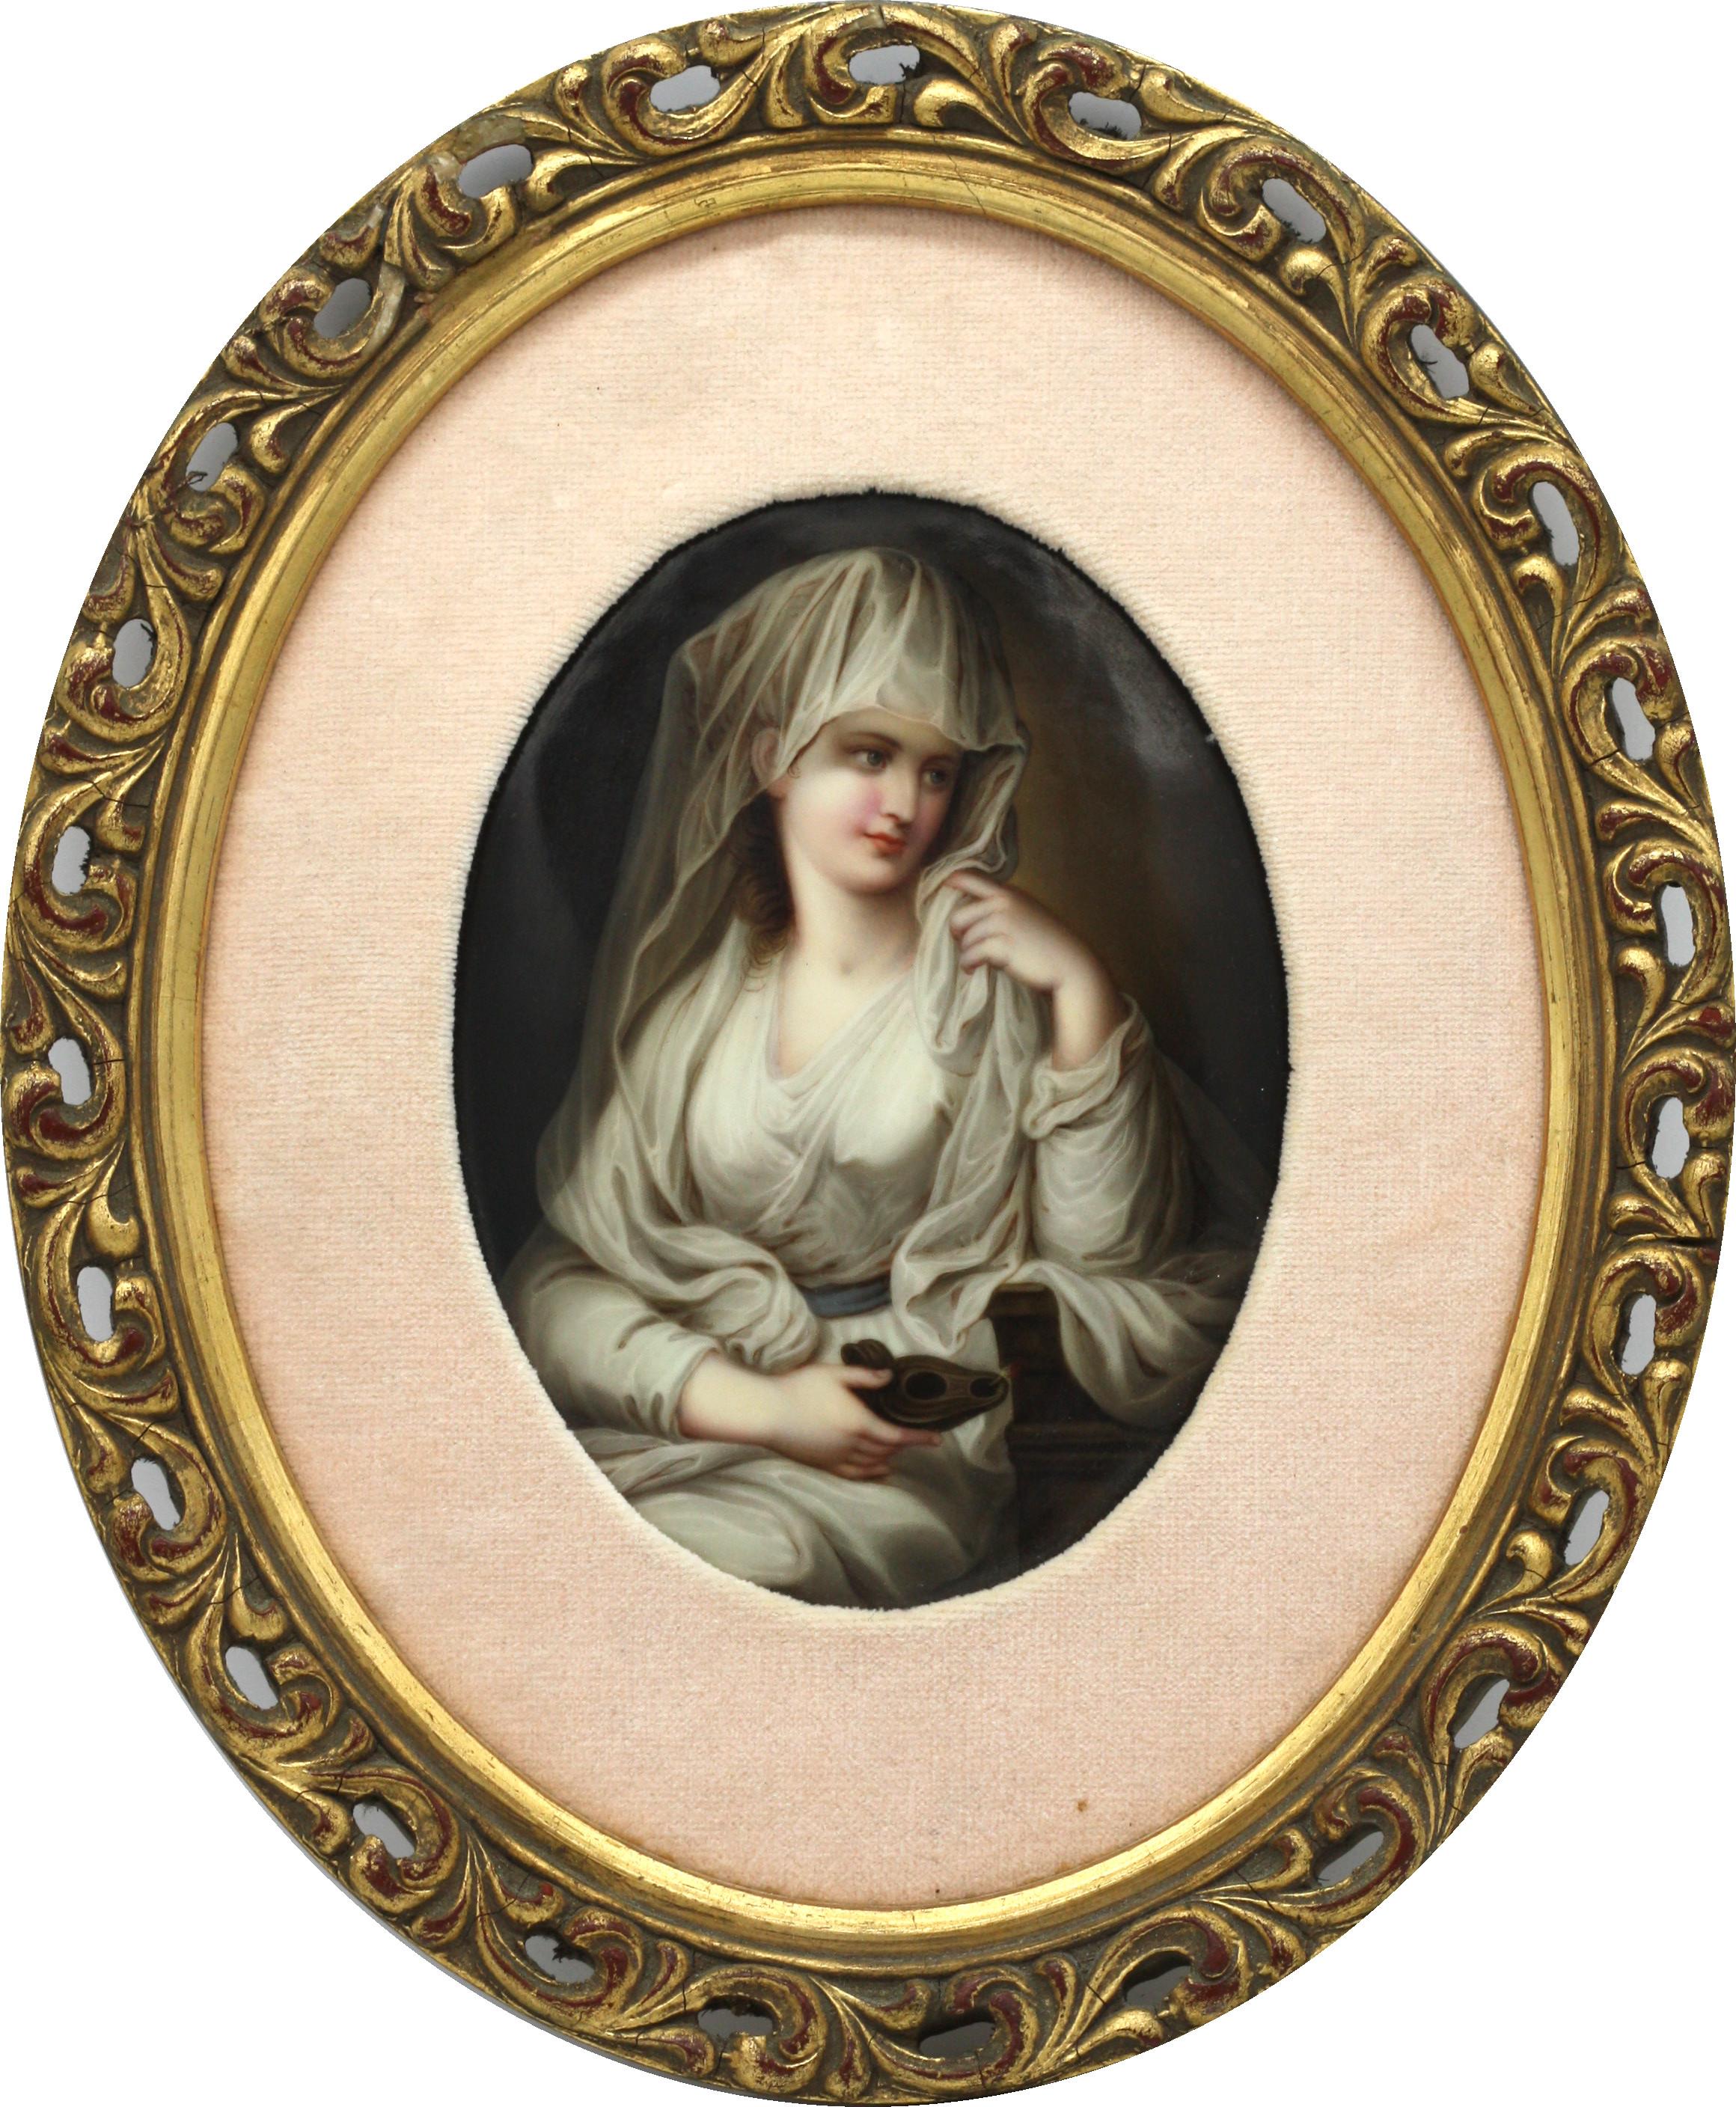 A French Porcelain oval portrait plaque
19th / early 20th century
painted with a beauty, framed
Measures: including frame 69 cm., 27.16 in. high.
 